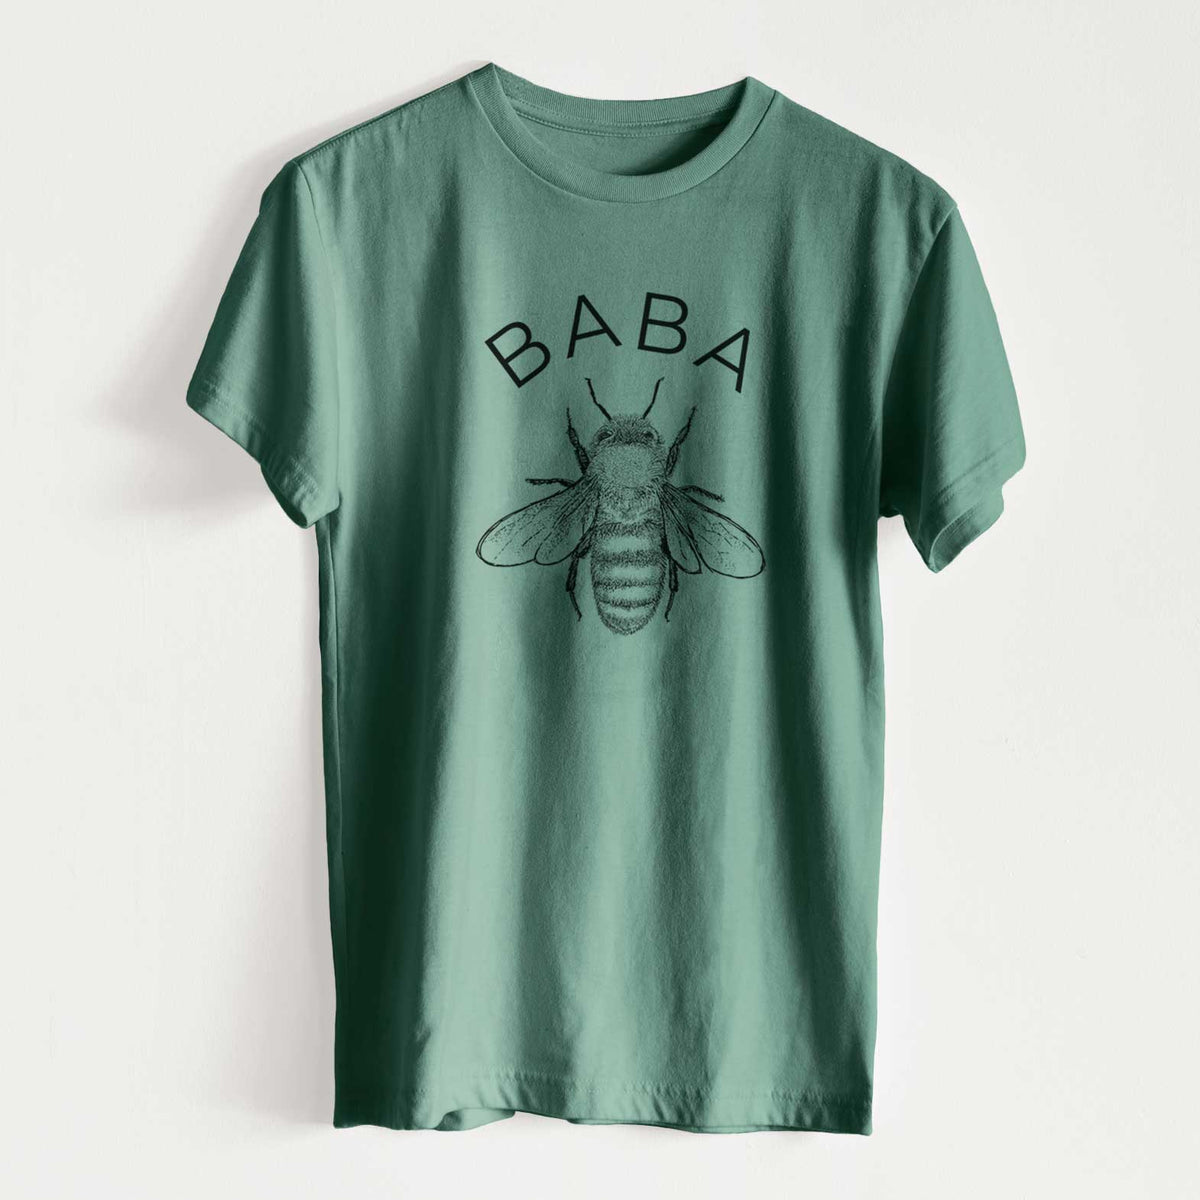 Baba Bee - Unisex Recycled Eco Tee  - CLOSEOUT - FINAL SALE